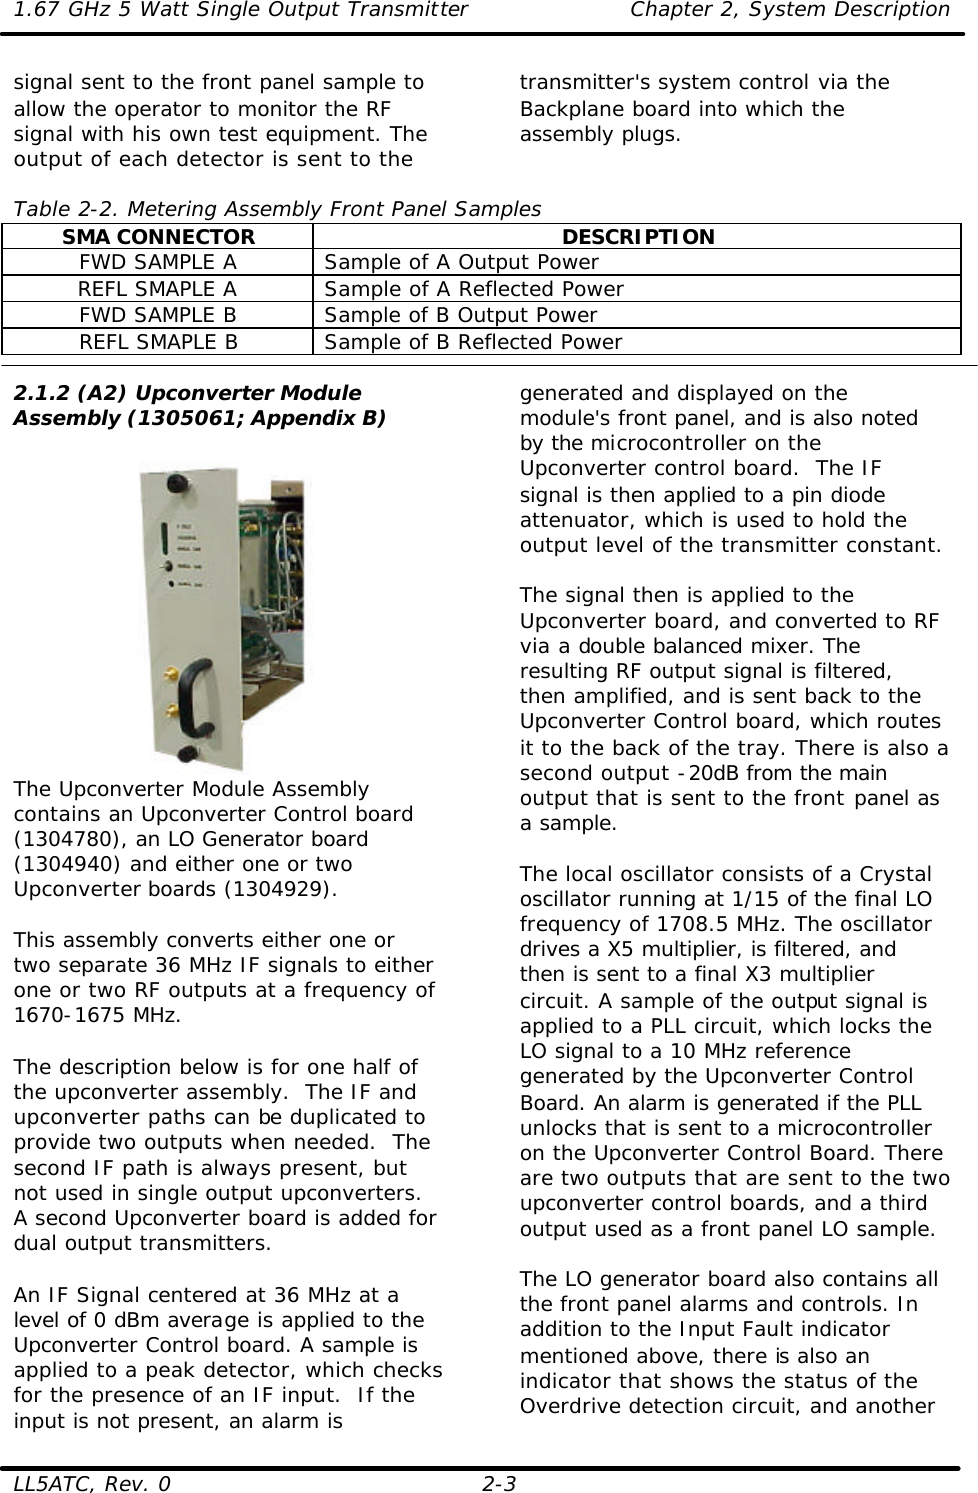 1.67 GHz 5 Watt Single Output Transmitter Chapter 2, System Description  LL5ATC, Rev. 0 2-3 signal sent to the front panel sample to allow the operator to monitor the RF signal with his own test equipment. The output of each detector is sent to the transmitter&apos;s system control via the Backplane board into which the assembly plugs.   Table 2-2. Metering Assembly Front Panel Samples SMA CONNECTOR DESCRIPTION FWD SAMPLE A Sample of A Output Power REFL SMAPLE A Sample of A Reflected Power FWD SAMPLE B Sample of B Output Power REFL SMAPLE B Sample of B Reflected Power  2.1.2 (A2) Upconverter Module Assembly (1305061; Appendix B)   The Upconverter Module Assembly contains an Upconverter Control board (1304780), an LO Generator board (1304940) and either one or two Upconverter boards (1304929).  This assembly converts either one or two separate 36 MHz IF signals to either one or two RF outputs at a frequency of 1670-1675 MHz.  The description below is for one half of the upconverter assembly.  The IF and upconverter paths can be duplicated to provide two outputs when needed.  The second IF path is always present, but not used in single output upconverters. A second Upconverter board is added for dual output transmitters.  An IF Signal centered at 36 MHz at a level of 0 dBm average is applied to the Upconverter Control board. A sample is applied to a peak detector, which checks for the presence of an IF input.  If the input is not present, an alarm is generated and displayed on the module&apos;s front panel, and is also noted by the microcontroller on the Upconverter control board.  The IF signal is then applied to a pin diode attenuator, which is used to hold the output level of the transmitter constant.   The signal then is applied to the Upconverter board, and converted to RF via a double balanced mixer. The resulting RF output signal is filtered, then amplified, and is sent back to the Upconverter Control board, which routes it to the back of the tray. There is also a second output -20dB from the main output that is sent to the front panel as a sample.   The local oscillator consists of a Crystal oscillator running at 1/15 of the final LO frequency of 1708.5 MHz. The oscillator drives a X5 multiplier, is filtered, and then is sent to a final X3 multiplier circuit. A sample of the output signal is applied to a PLL circuit, which locks the LO signal to a 10 MHz reference generated by the Upconverter Control Board. An alarm is generated if the PLL unlocks that is sent to a microcontroller on the Upconverter Control Board. There are two outputs that are sent to the two upconverter control boards, and a third output used as a front panel LO sample.   The LO generator board also contains all the front panel alarms and controls. In addition to the Input Fault indicator mentioned above, there is also an indicator that shows the status of the Overdrive detection circuit, and another 